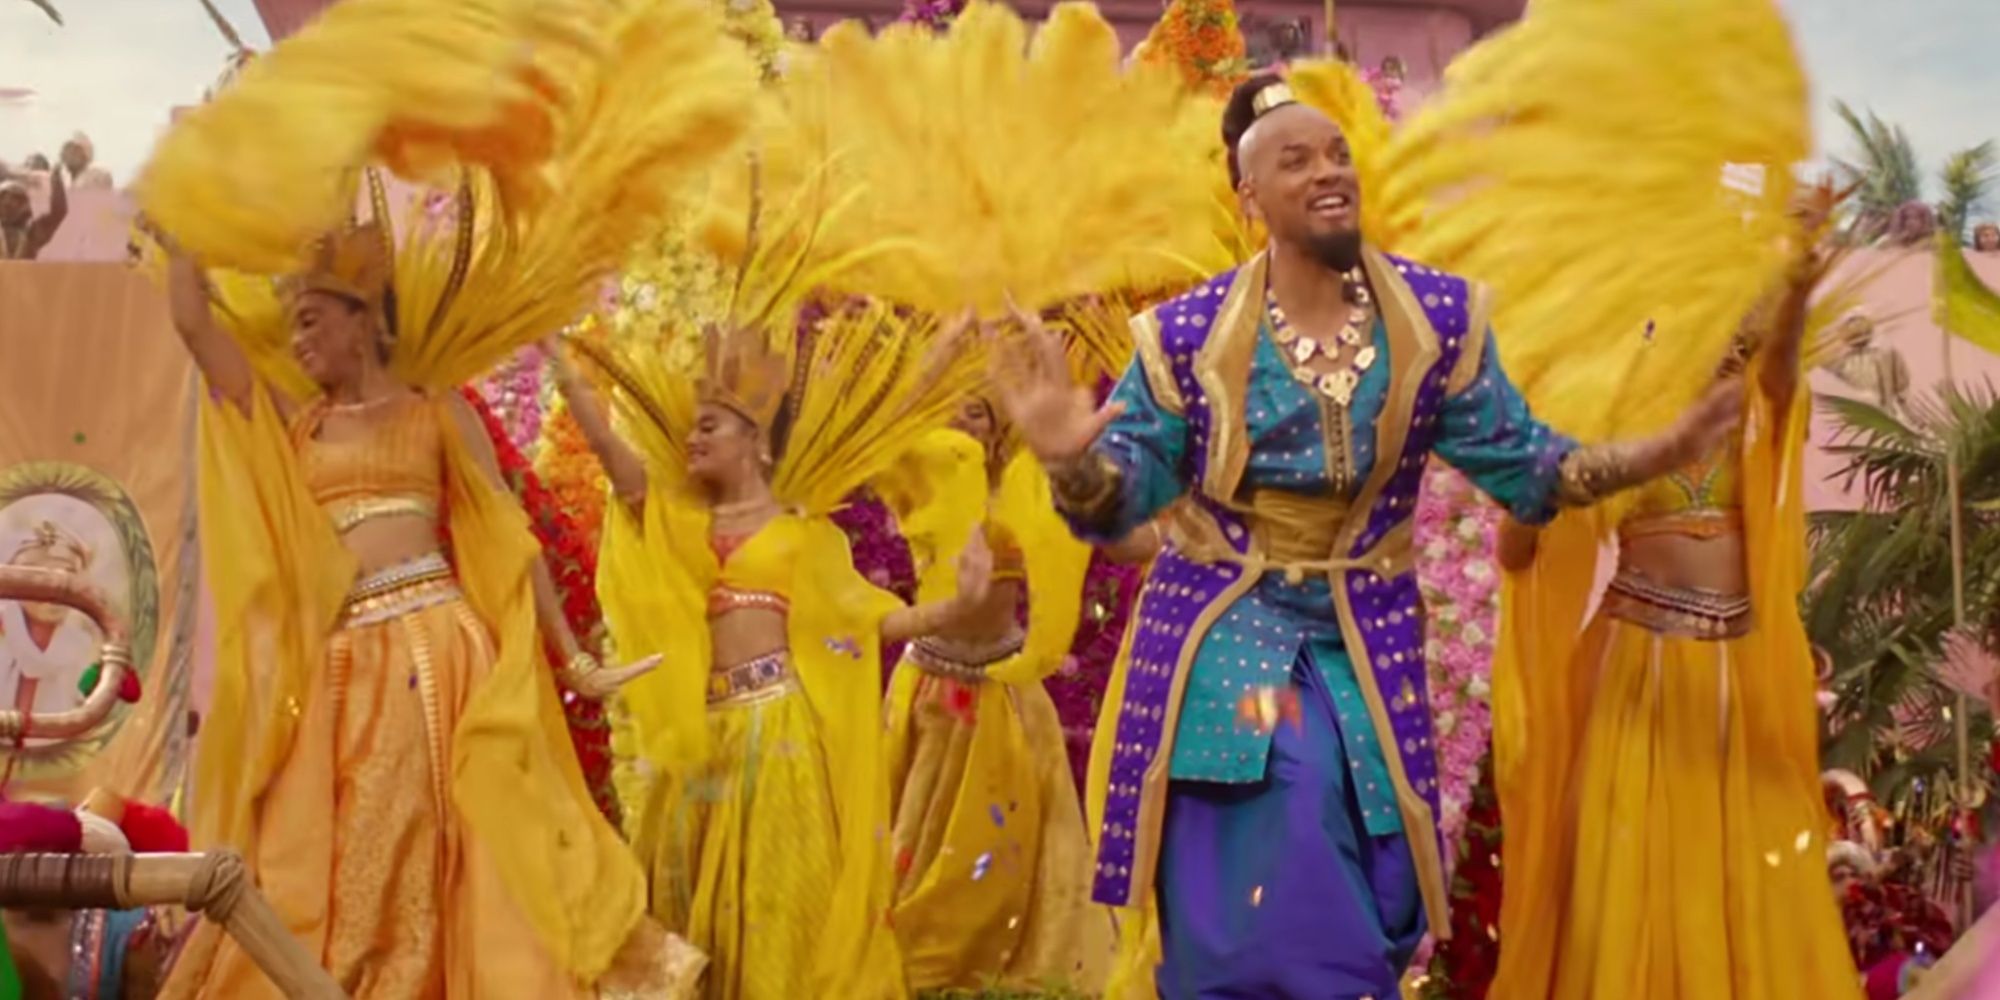 Will Smith dances and sings as Genie, introducing the new and improved Prince Ali with elephants and colorful backup dancers in the parade.